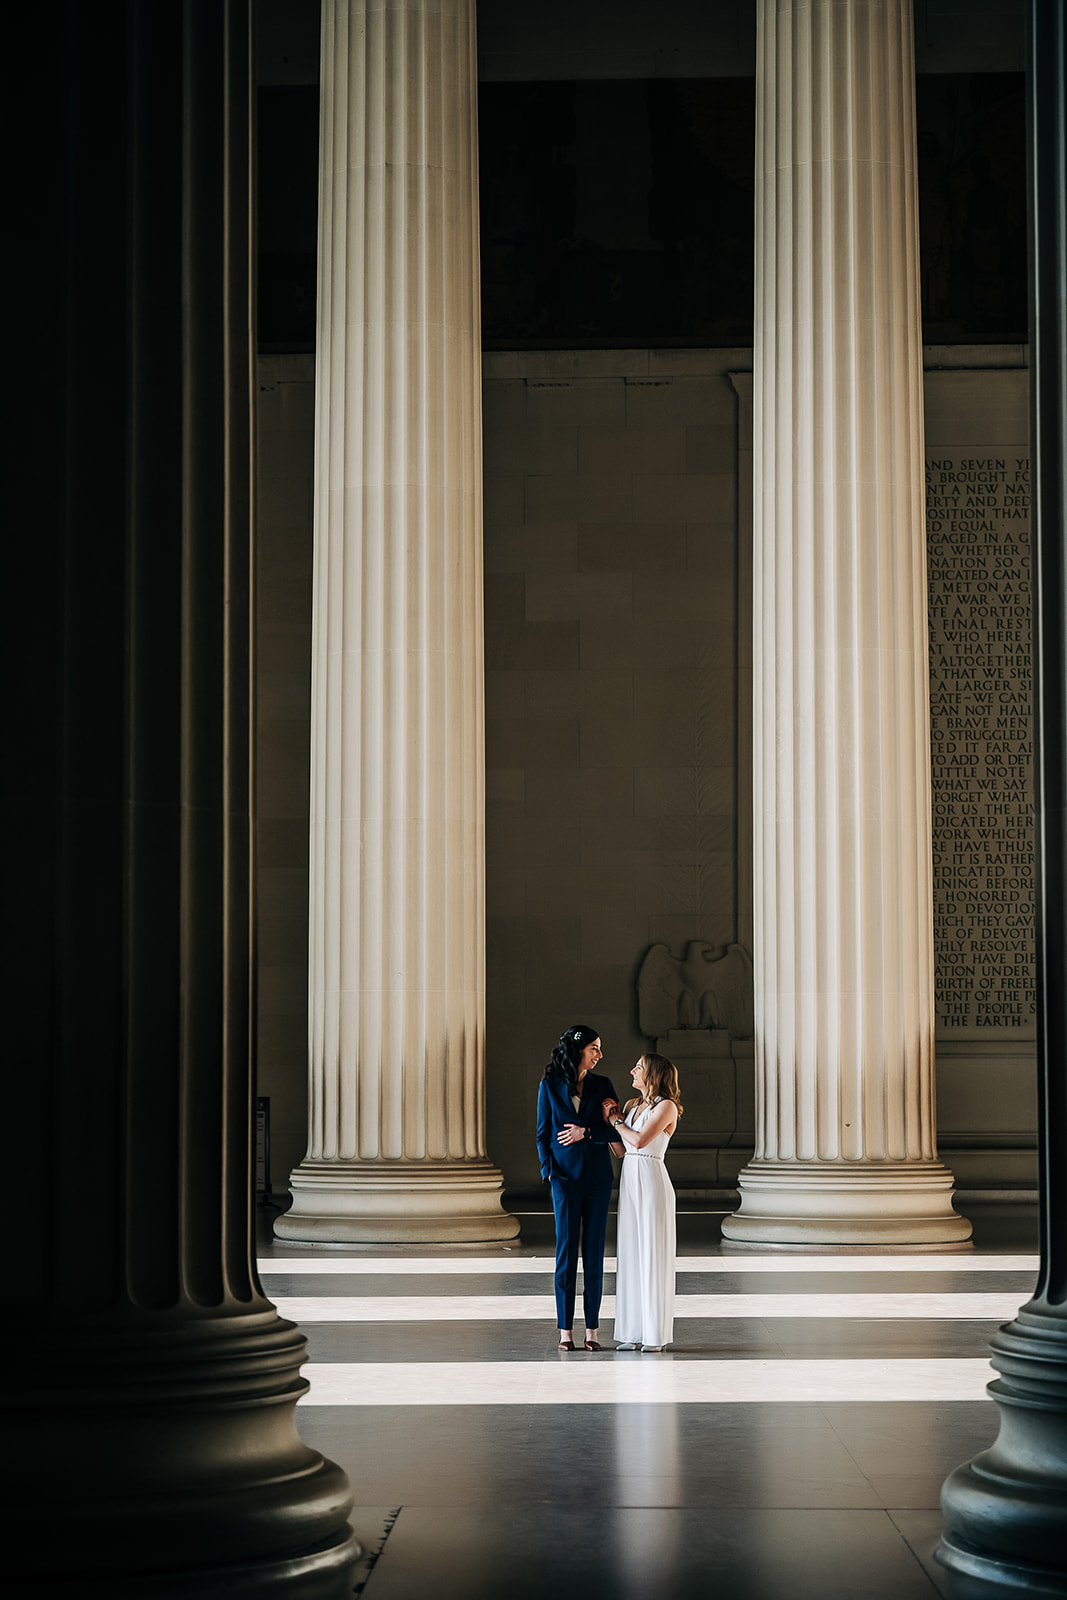 How to find a marriage proposal photographer in Washington DC